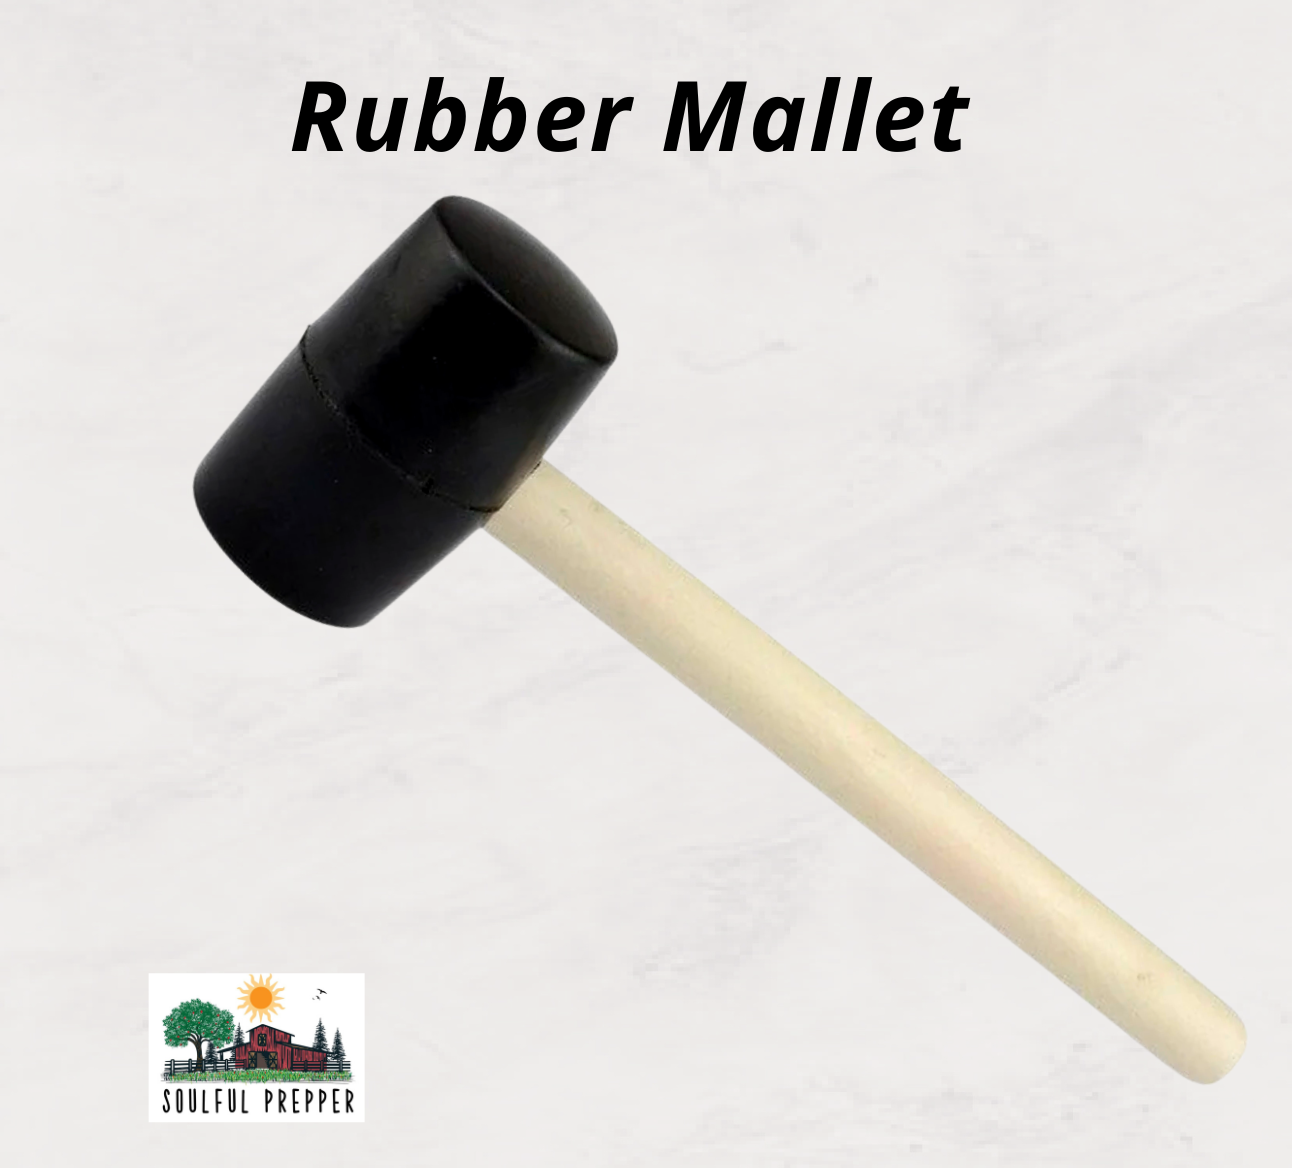 Rubber Mallet for storing food in plastic buckets